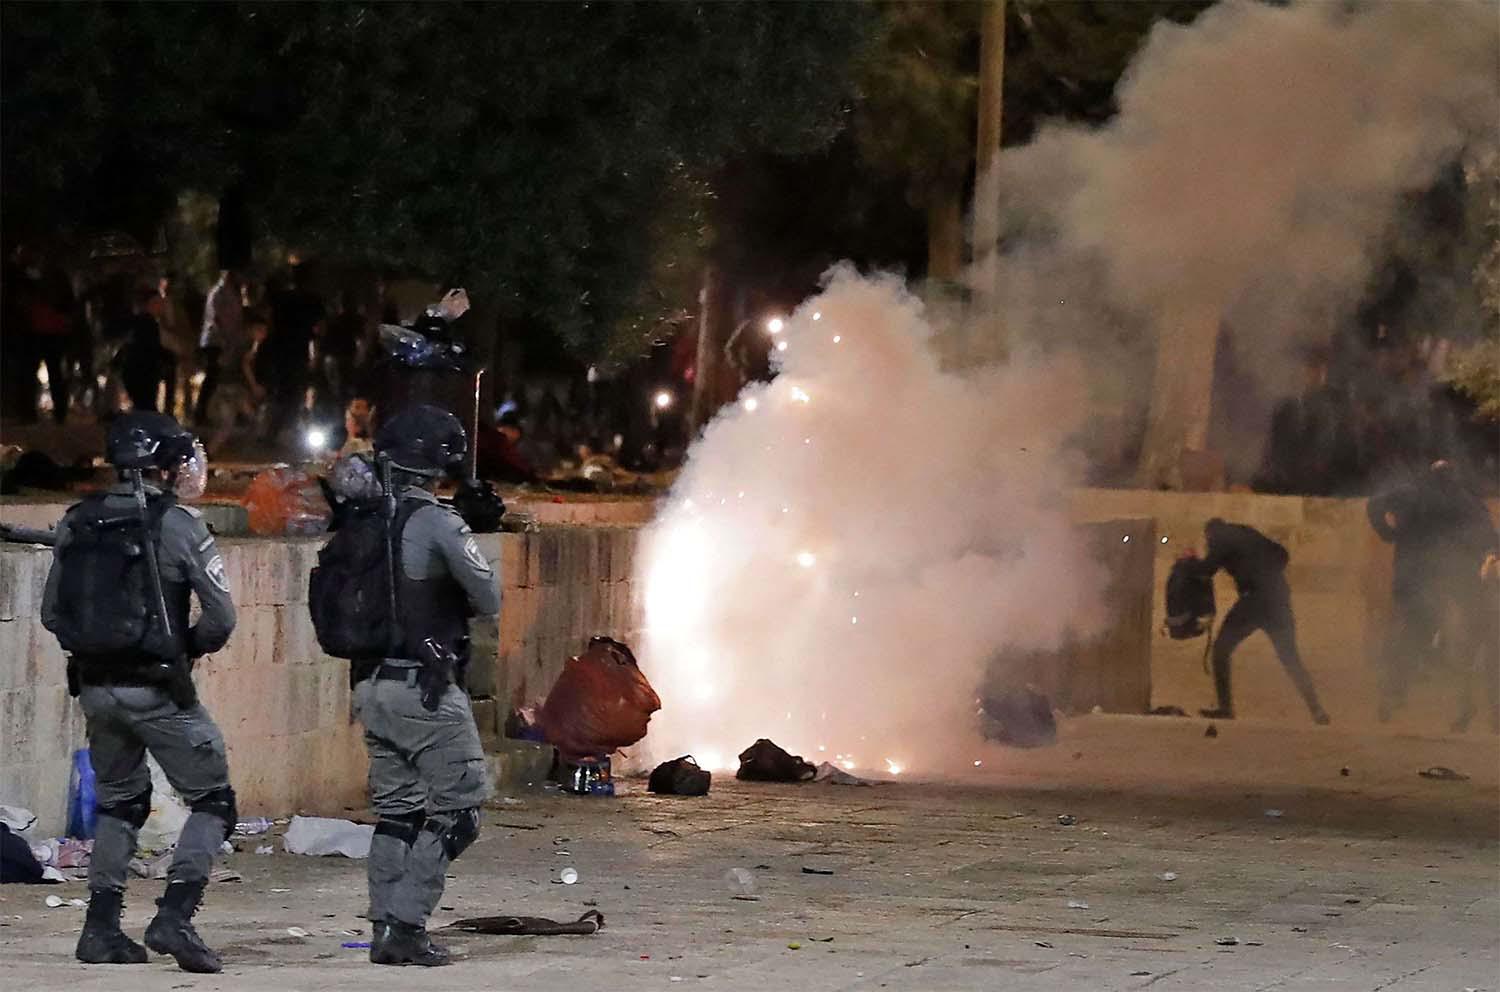 Tear gas billows amid clashes between Israeli security forces and Palestinian protesters at the al-Aqsa mosque compound